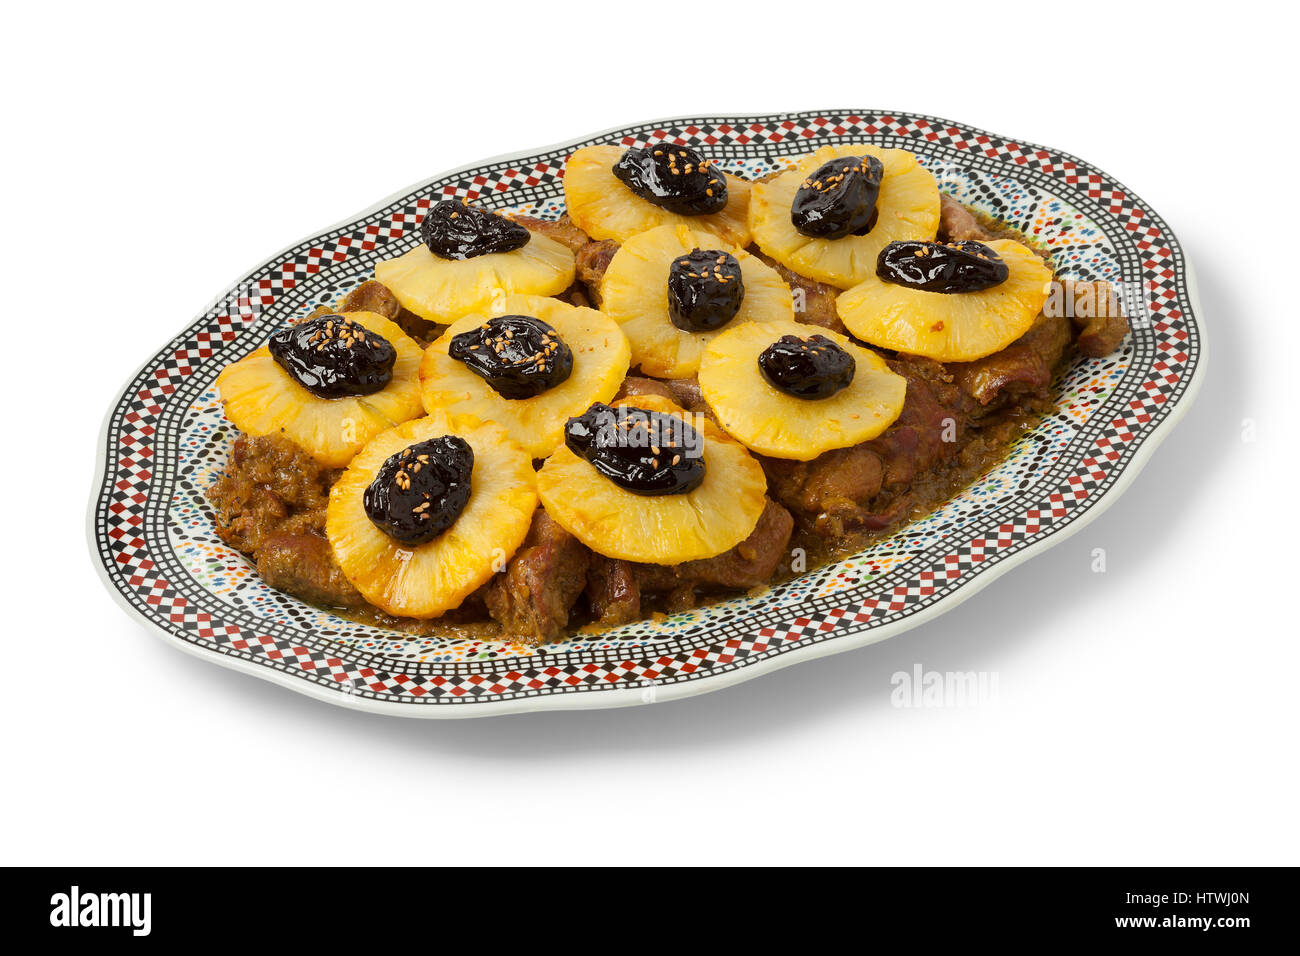 Moroccan dish with meat, pineapple and prunes on white background Stock Photo